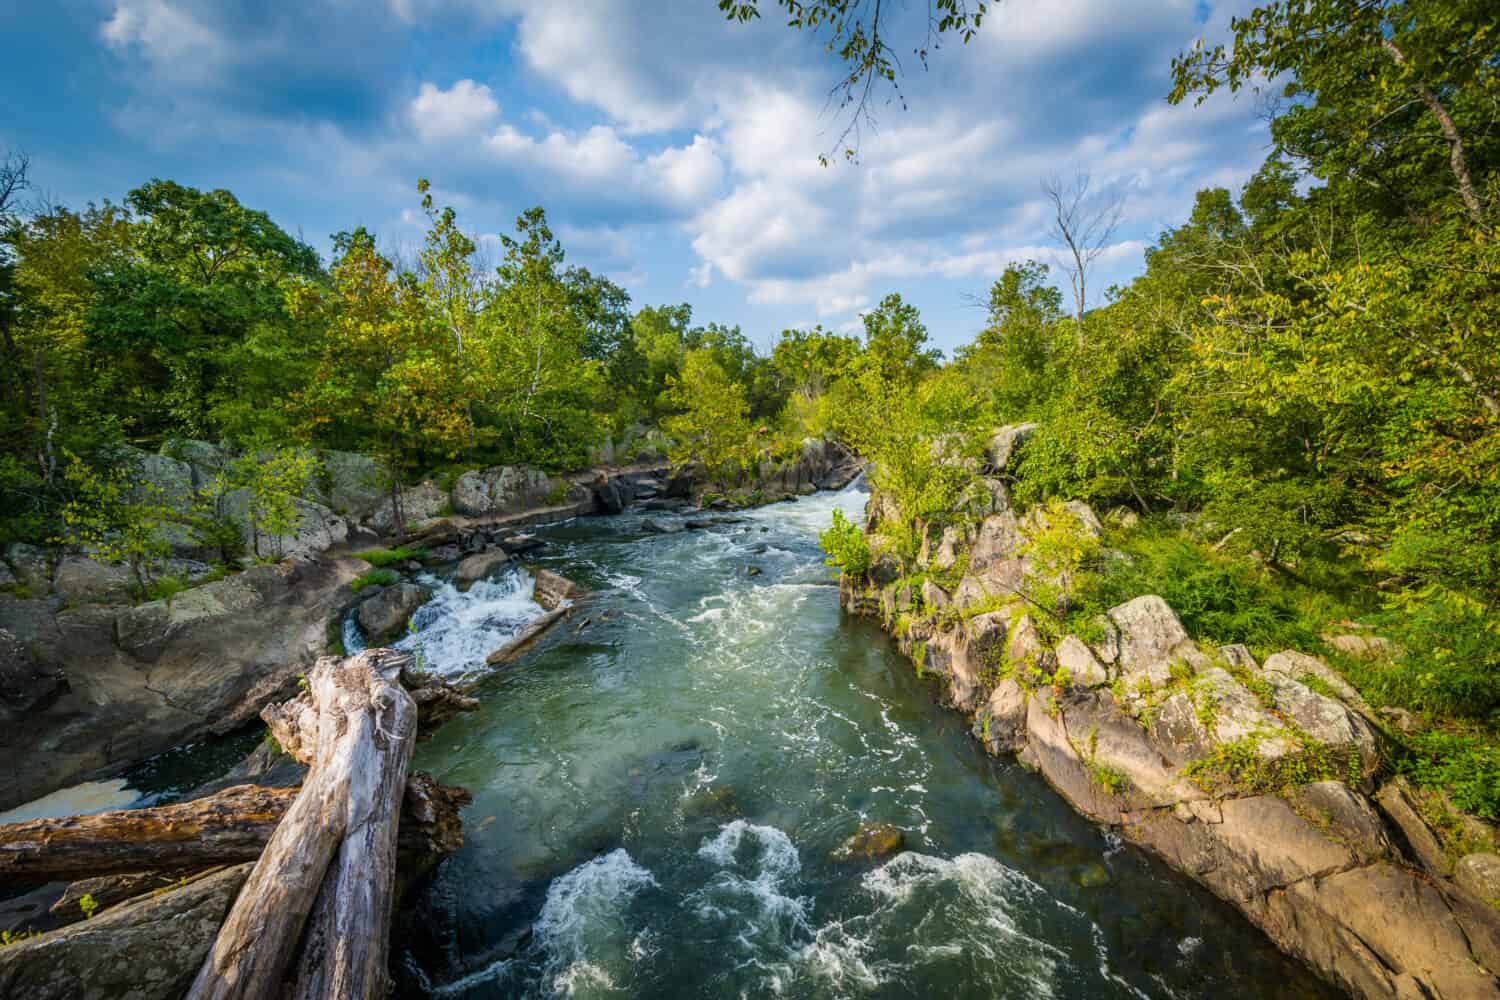 Rapids in the Potomac River at Great Falls, seen from Olmsted Island at Chesapeake & Ohio Canal National Historical Park, Maryland.